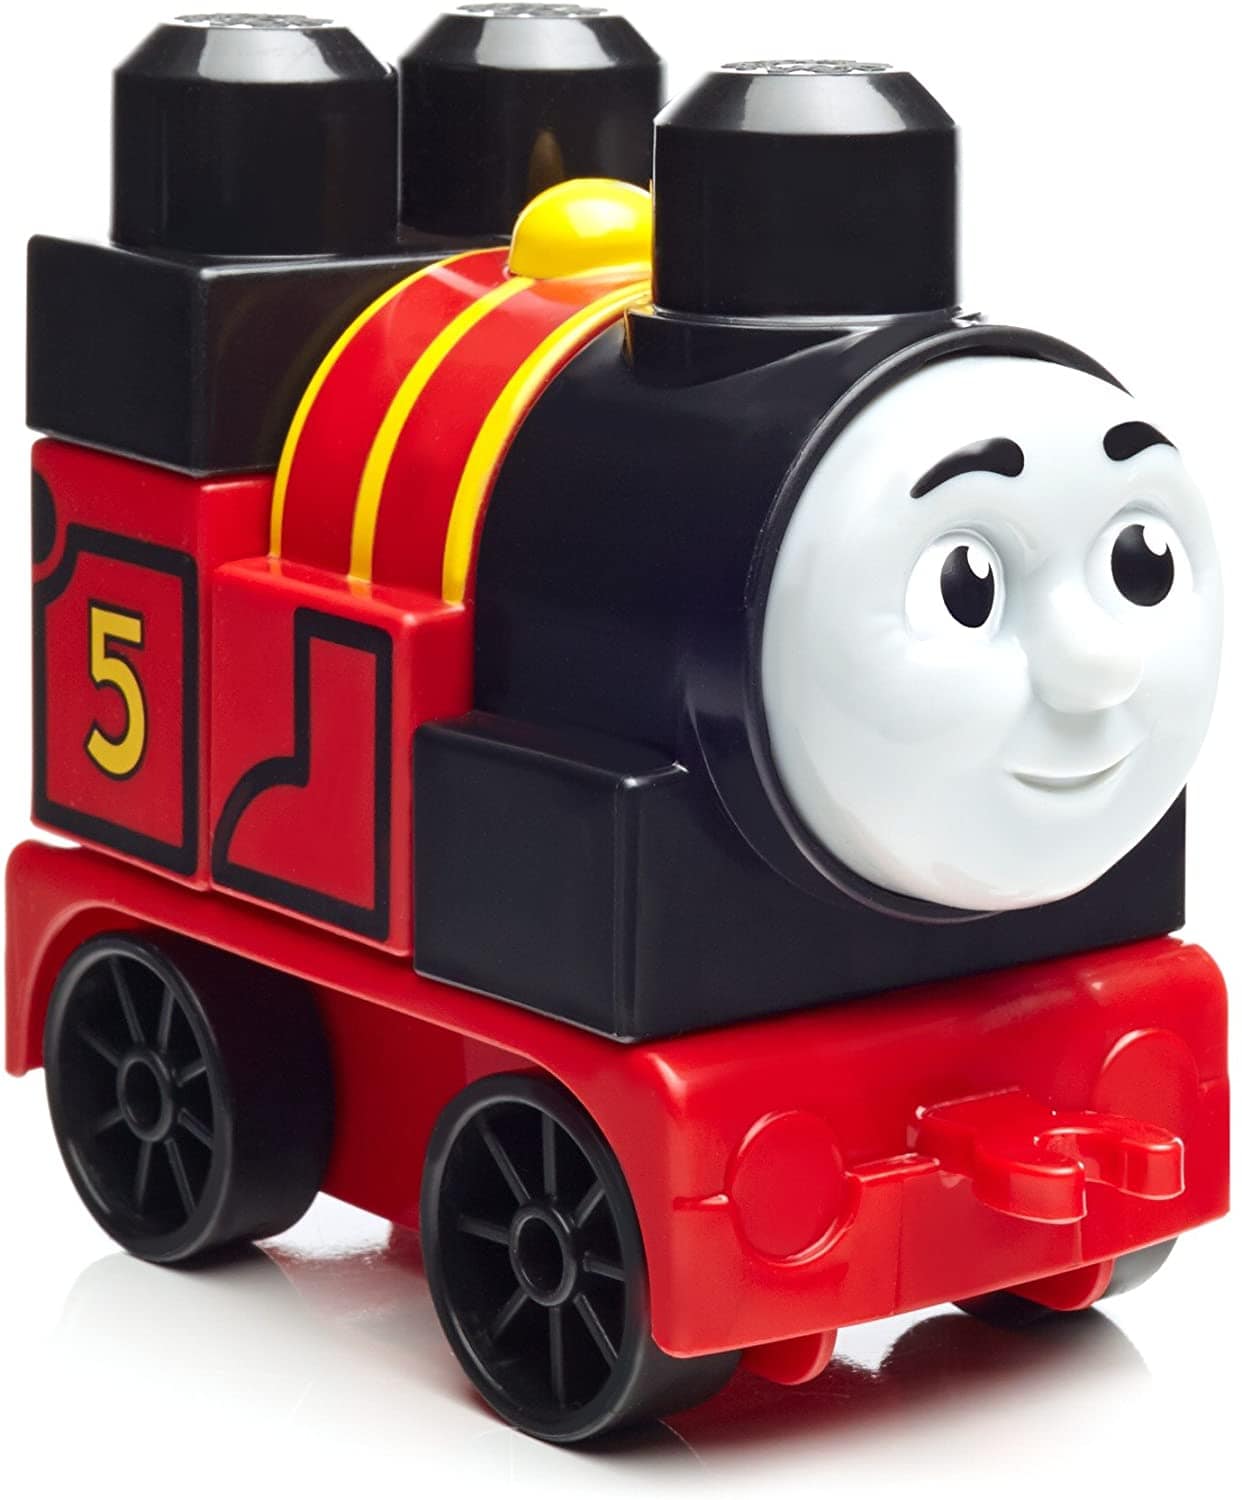 Thomas & Friends: James - Mega Bloks | Fisher Price by Fisher-Price Toy